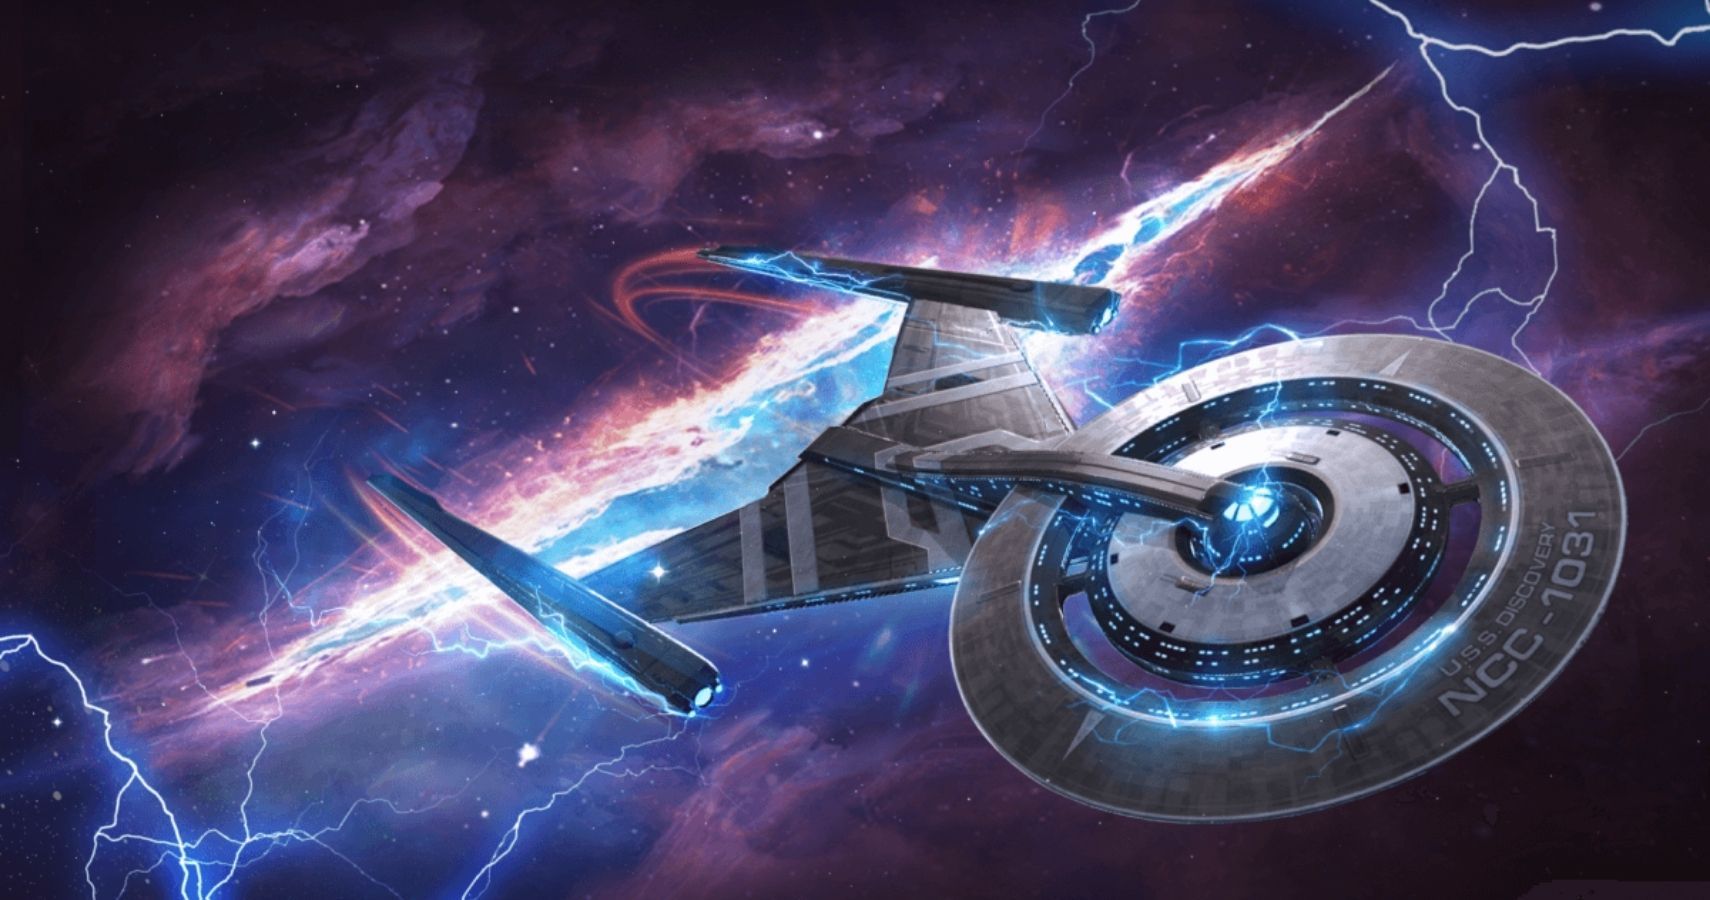 Star Trek: Fleet Command Update Adds quot Discovery Arc quot To Celebrate Star